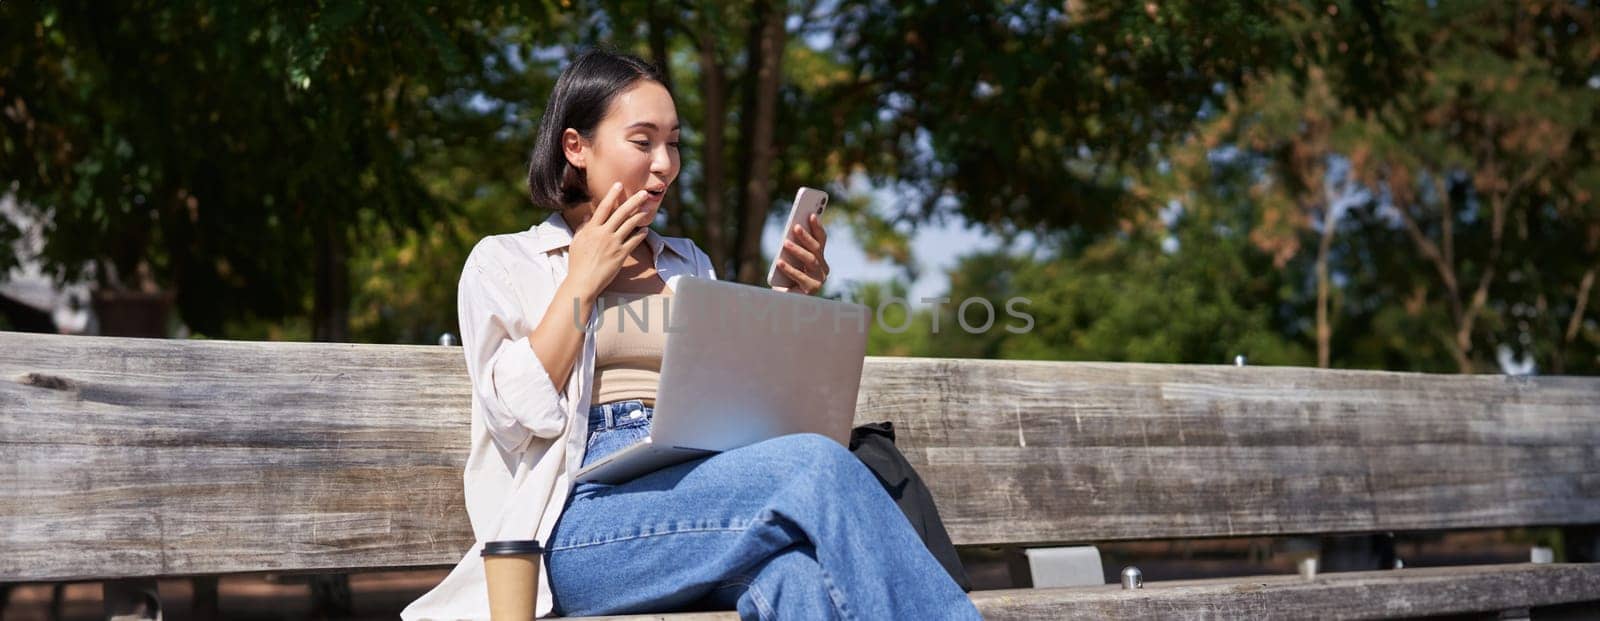 Asian girl looks surprised at smartphone screen, checking mobile phone notifications and looking excited, sitting with laptop in park on bench.